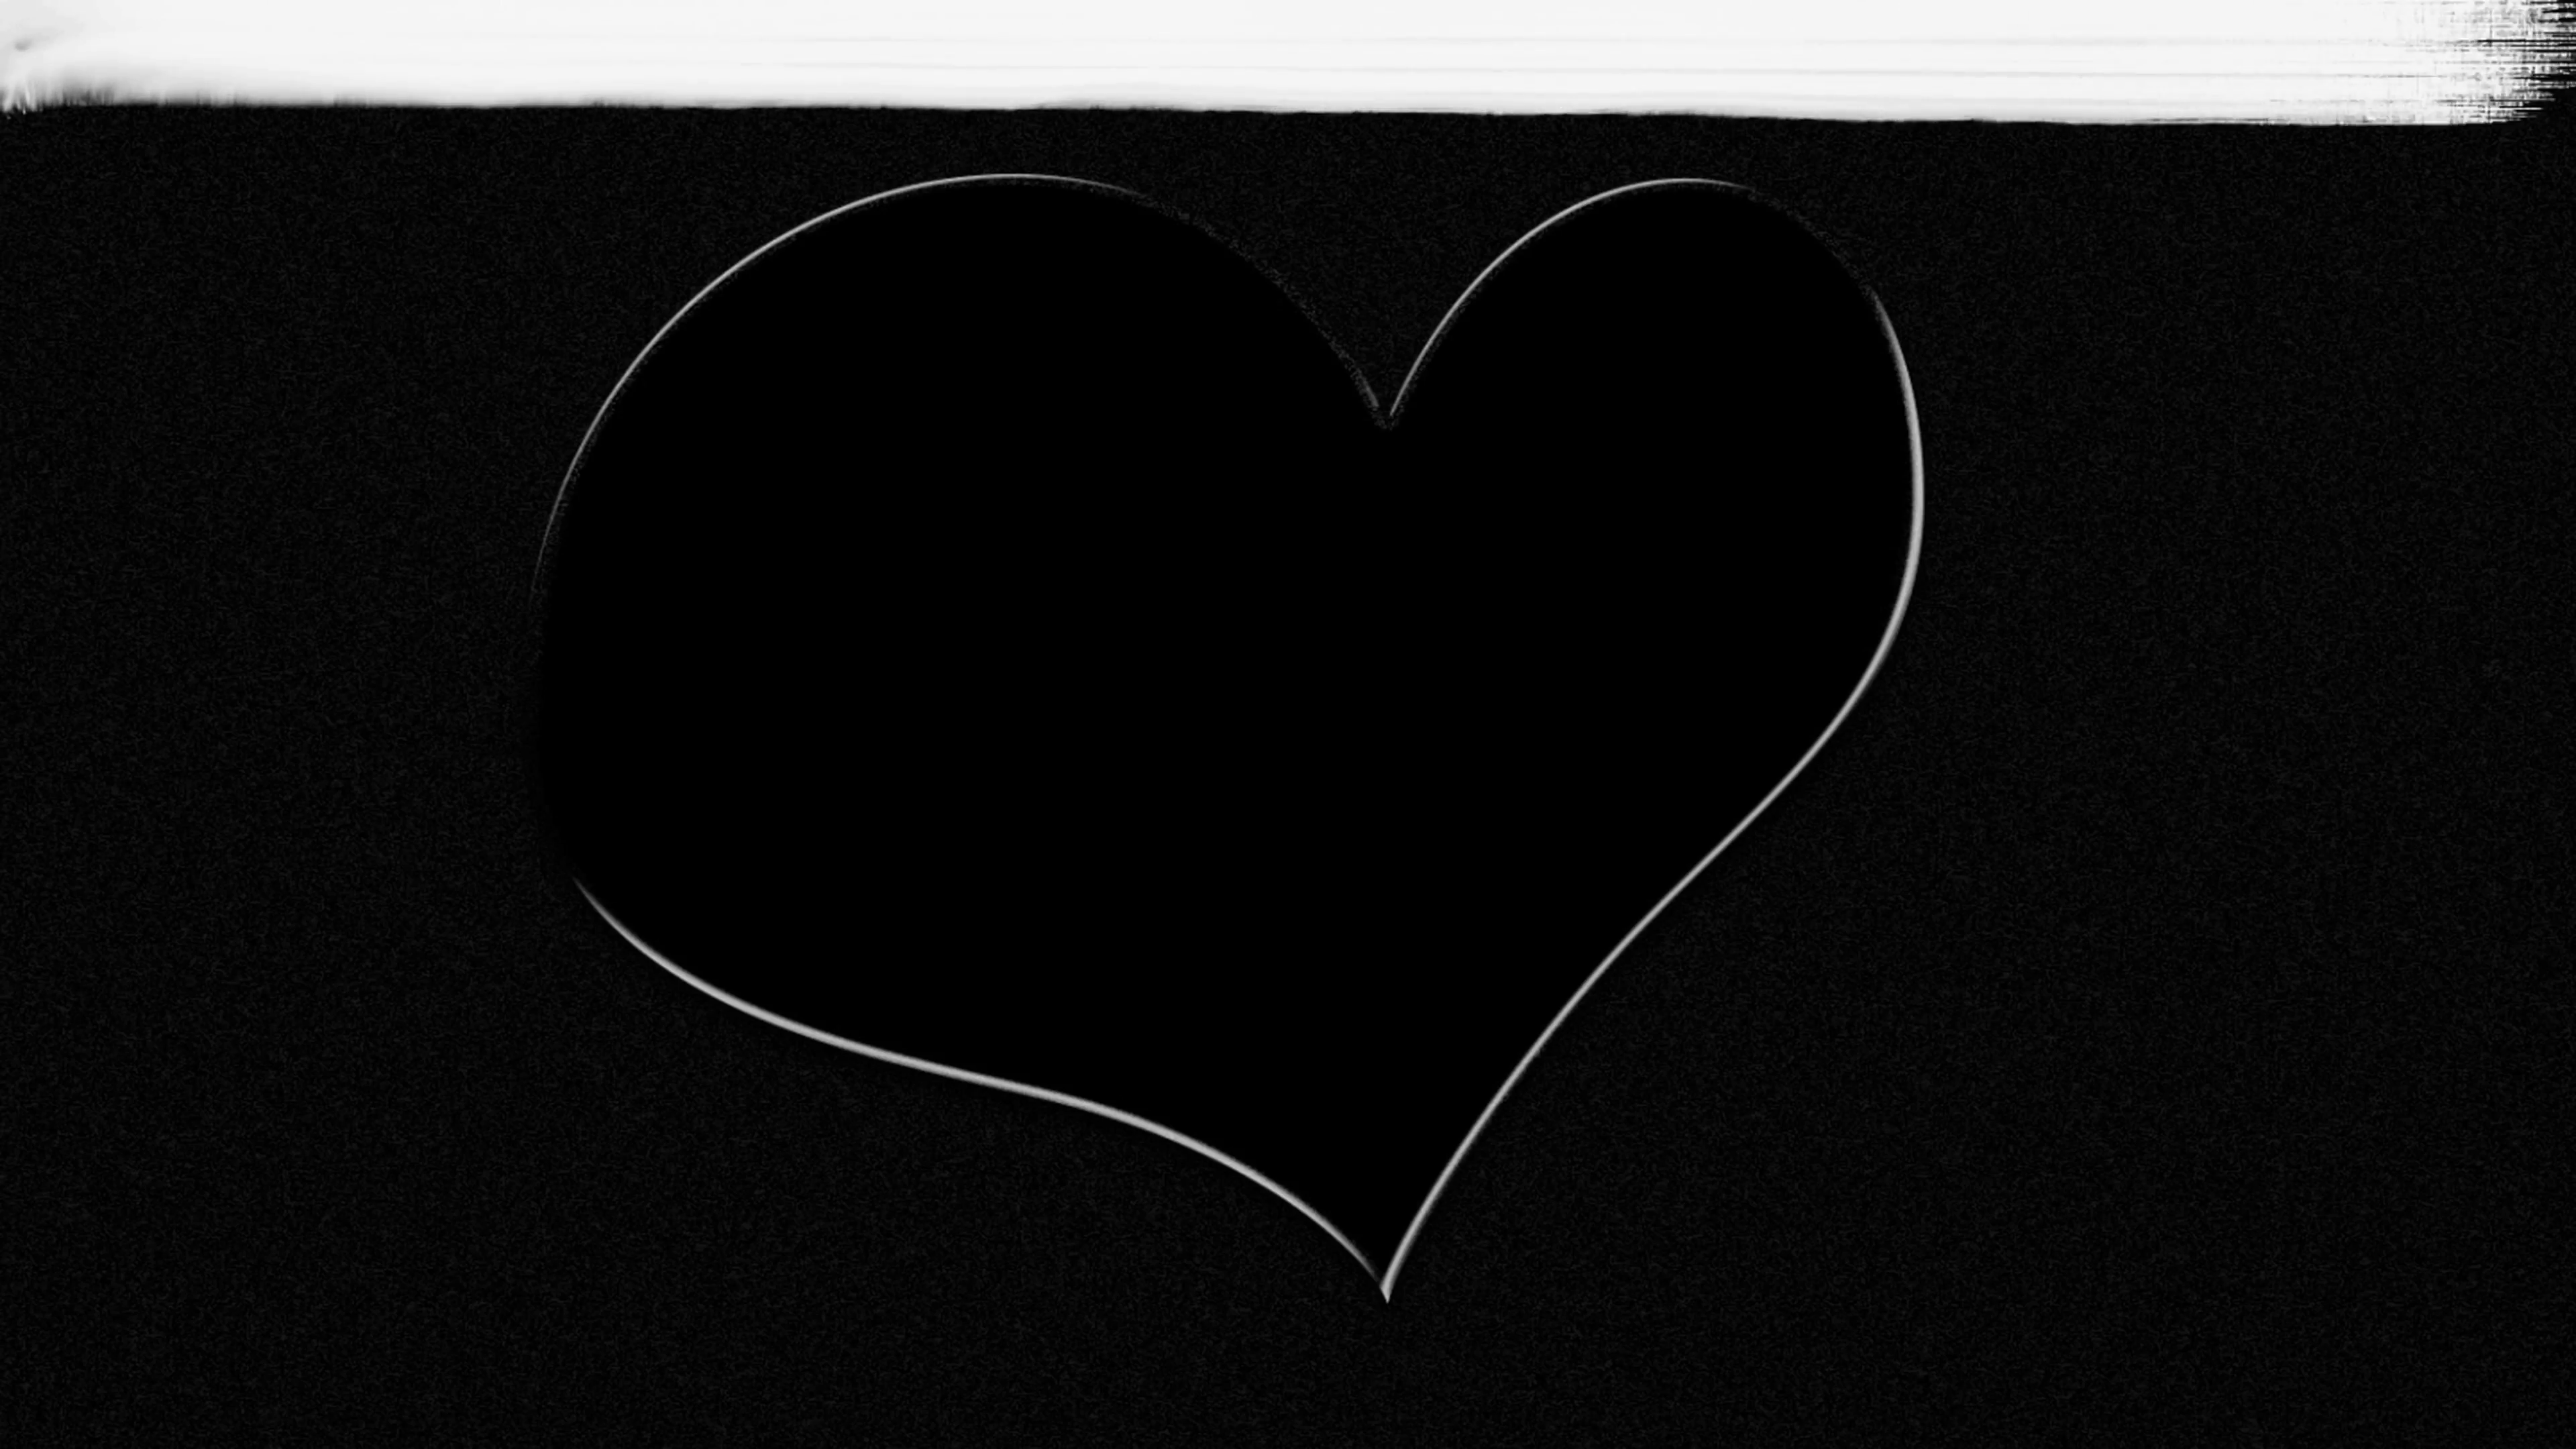 Hand drawn white heart on black background painted over with white